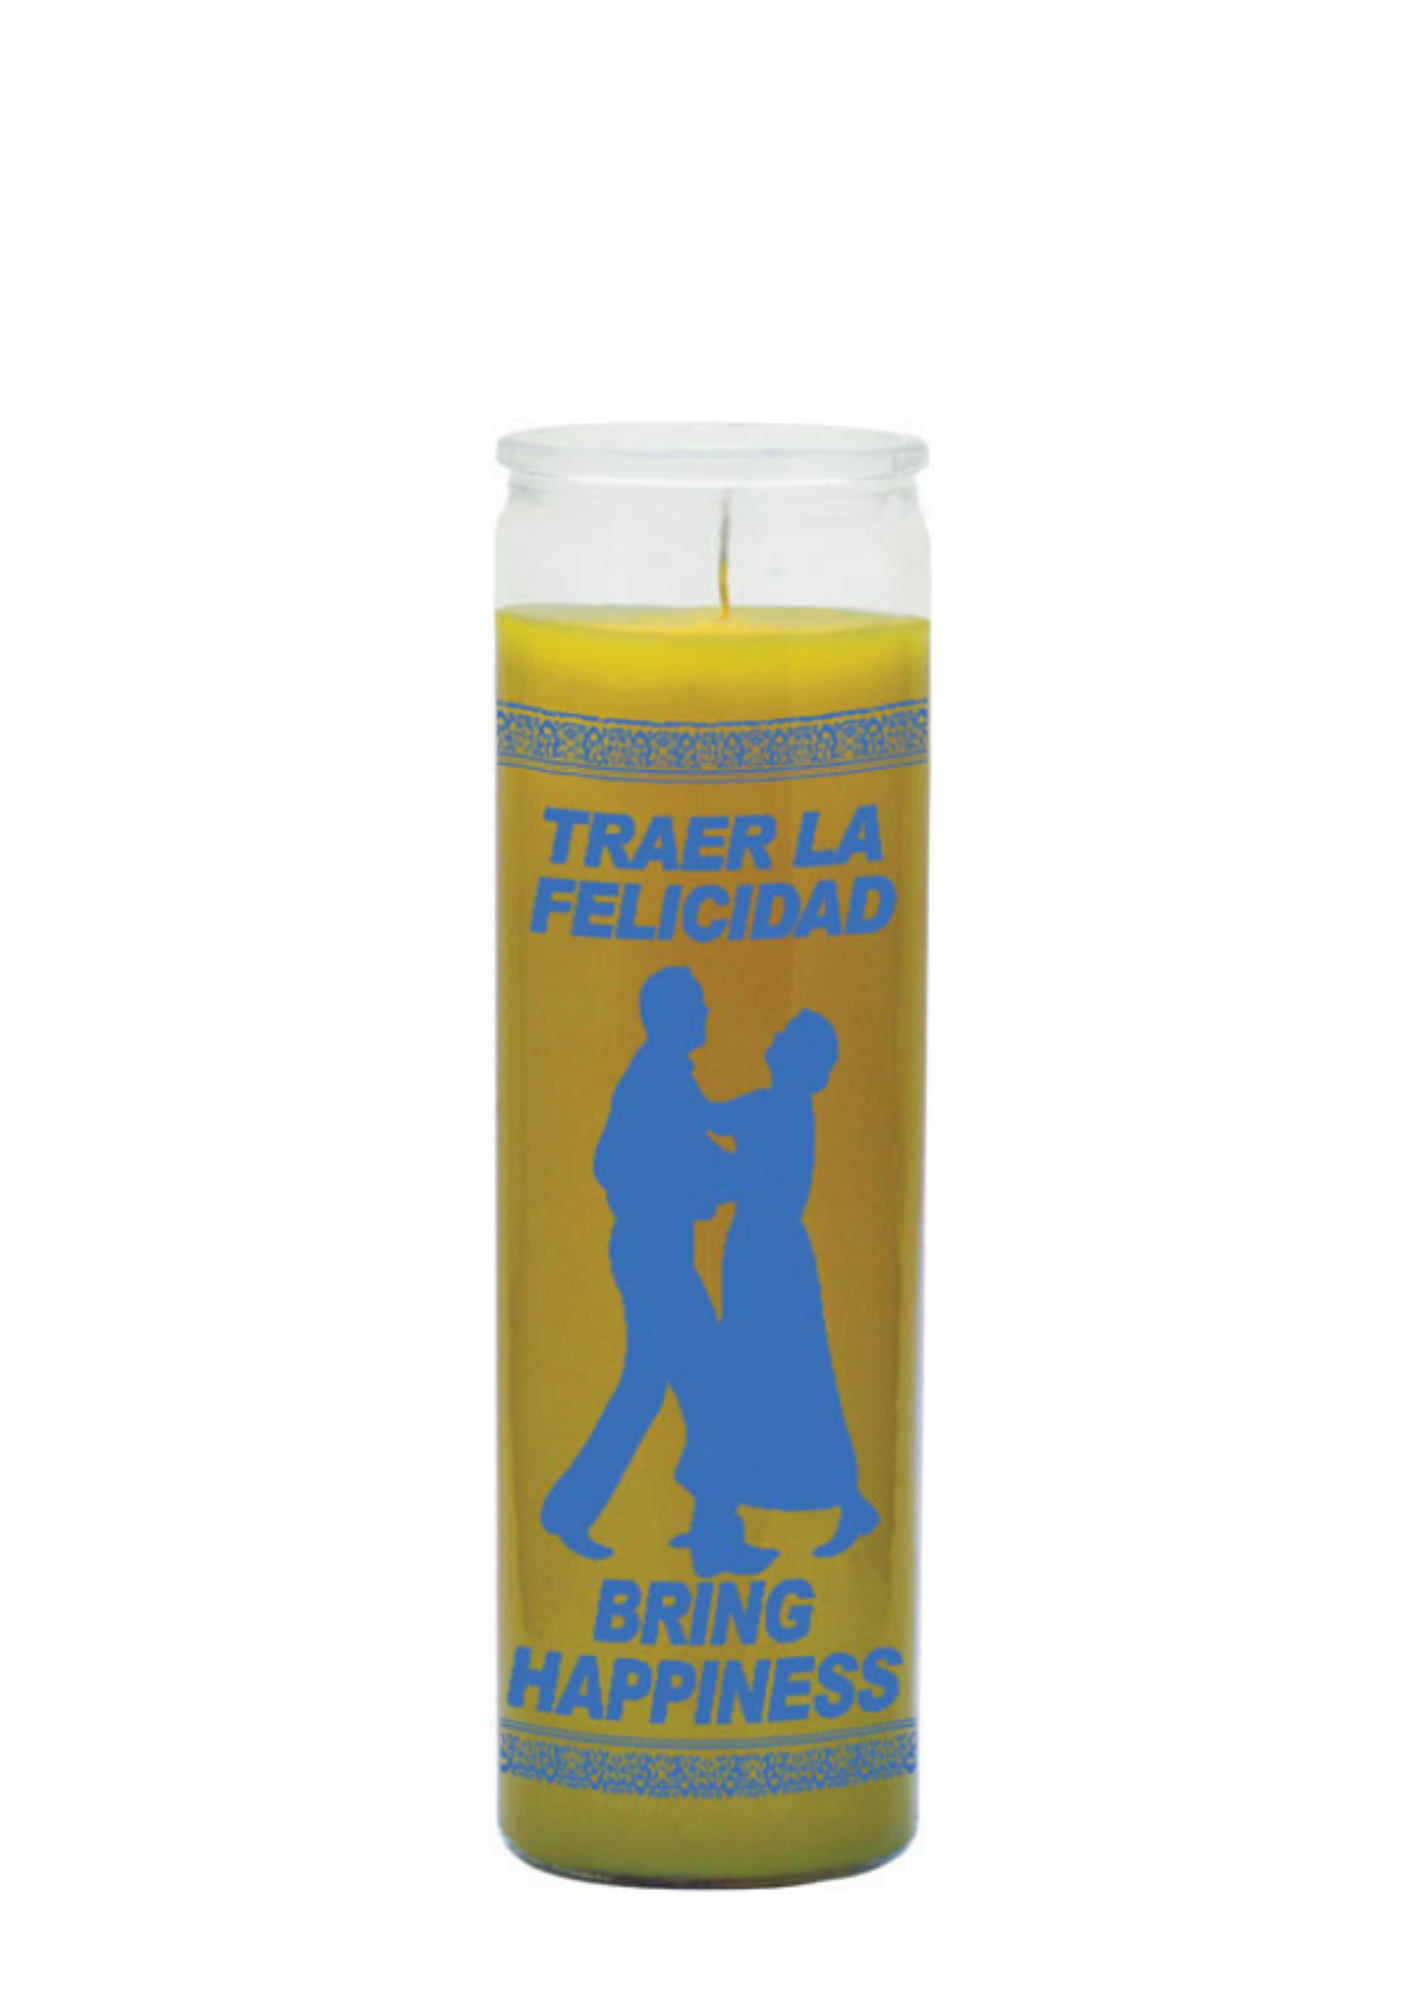 Bring happiness (yellow) 1 color 7 day candle